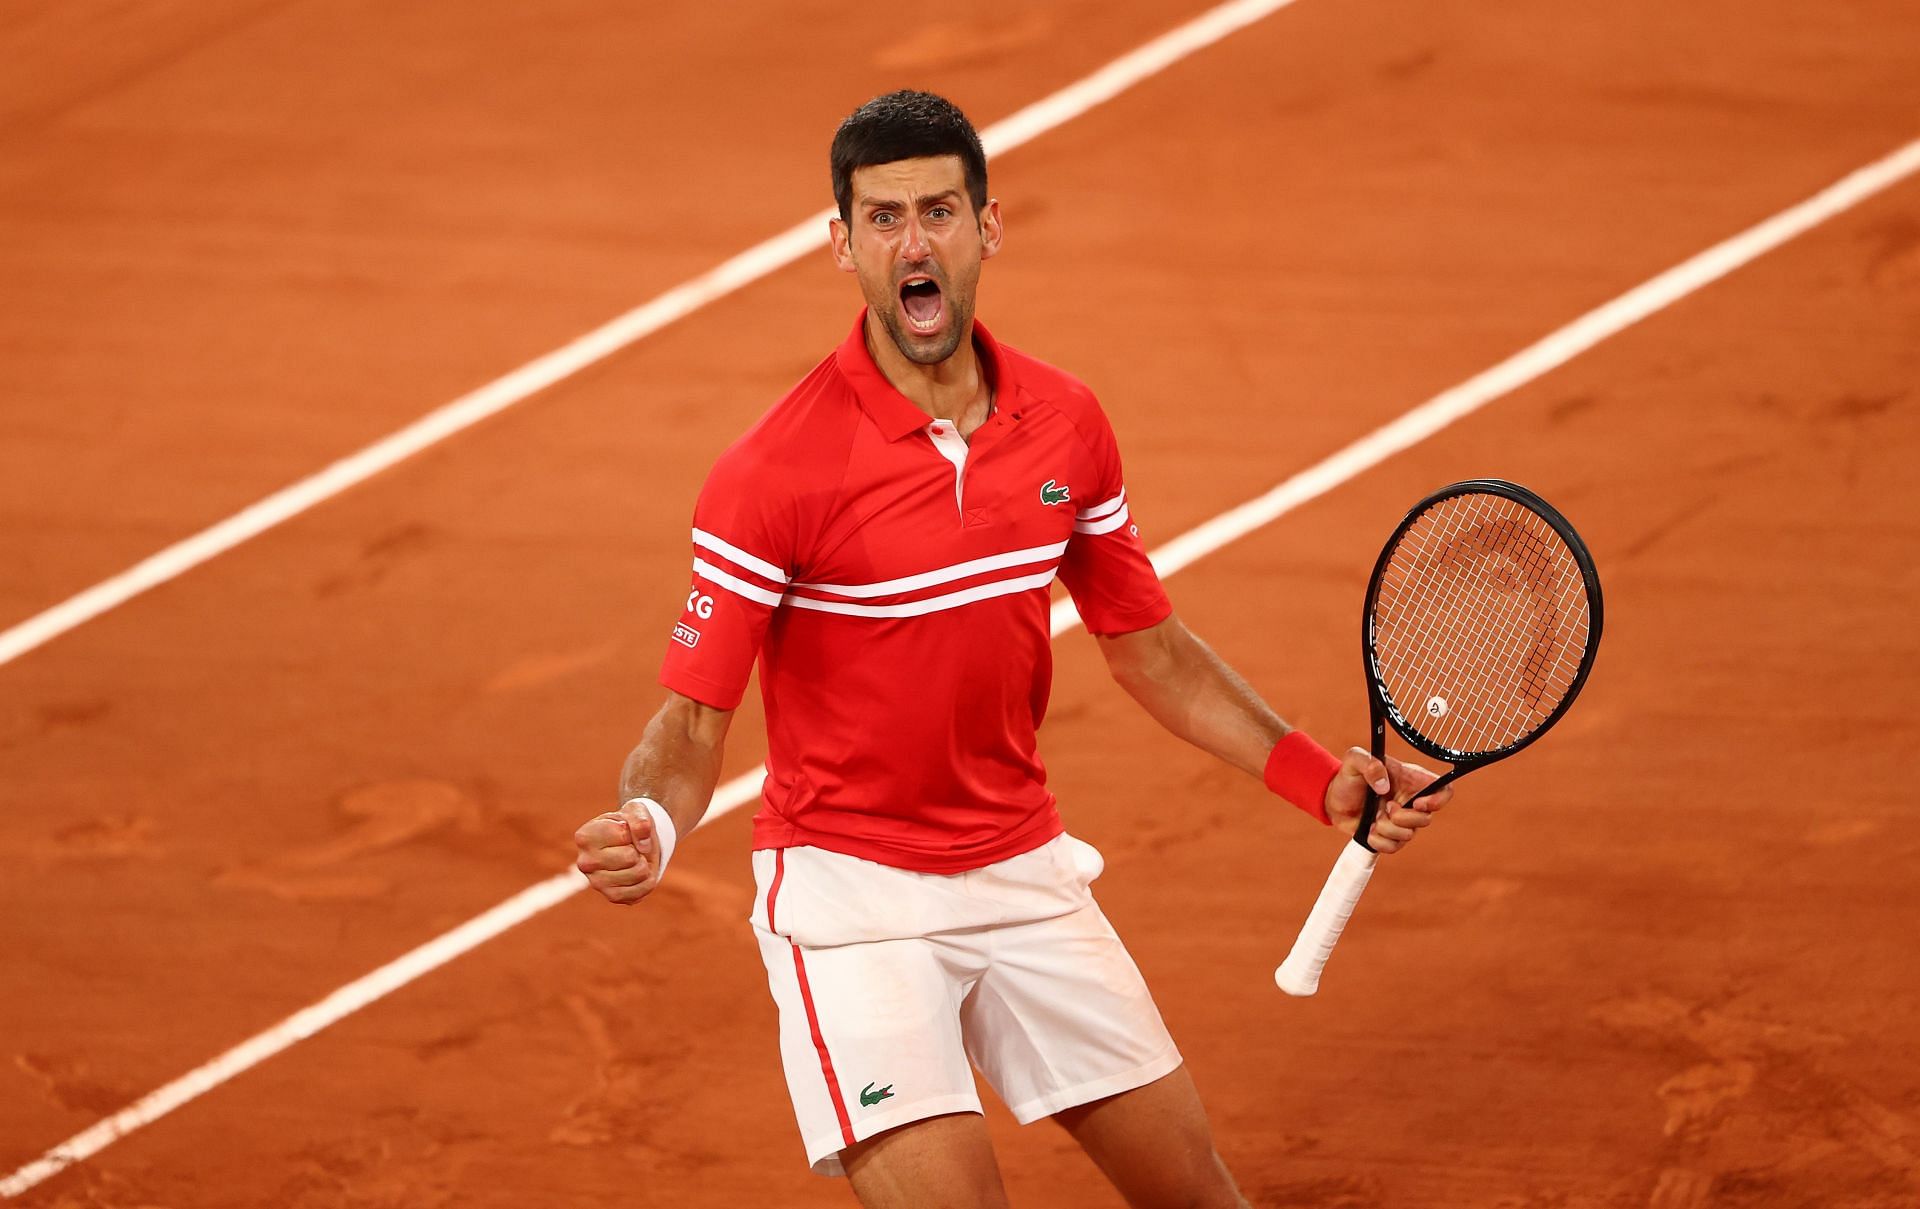 WATCH: When Novak Djokovic let out an emotionally-charged roar after beating Matteo Berrettini at French Open